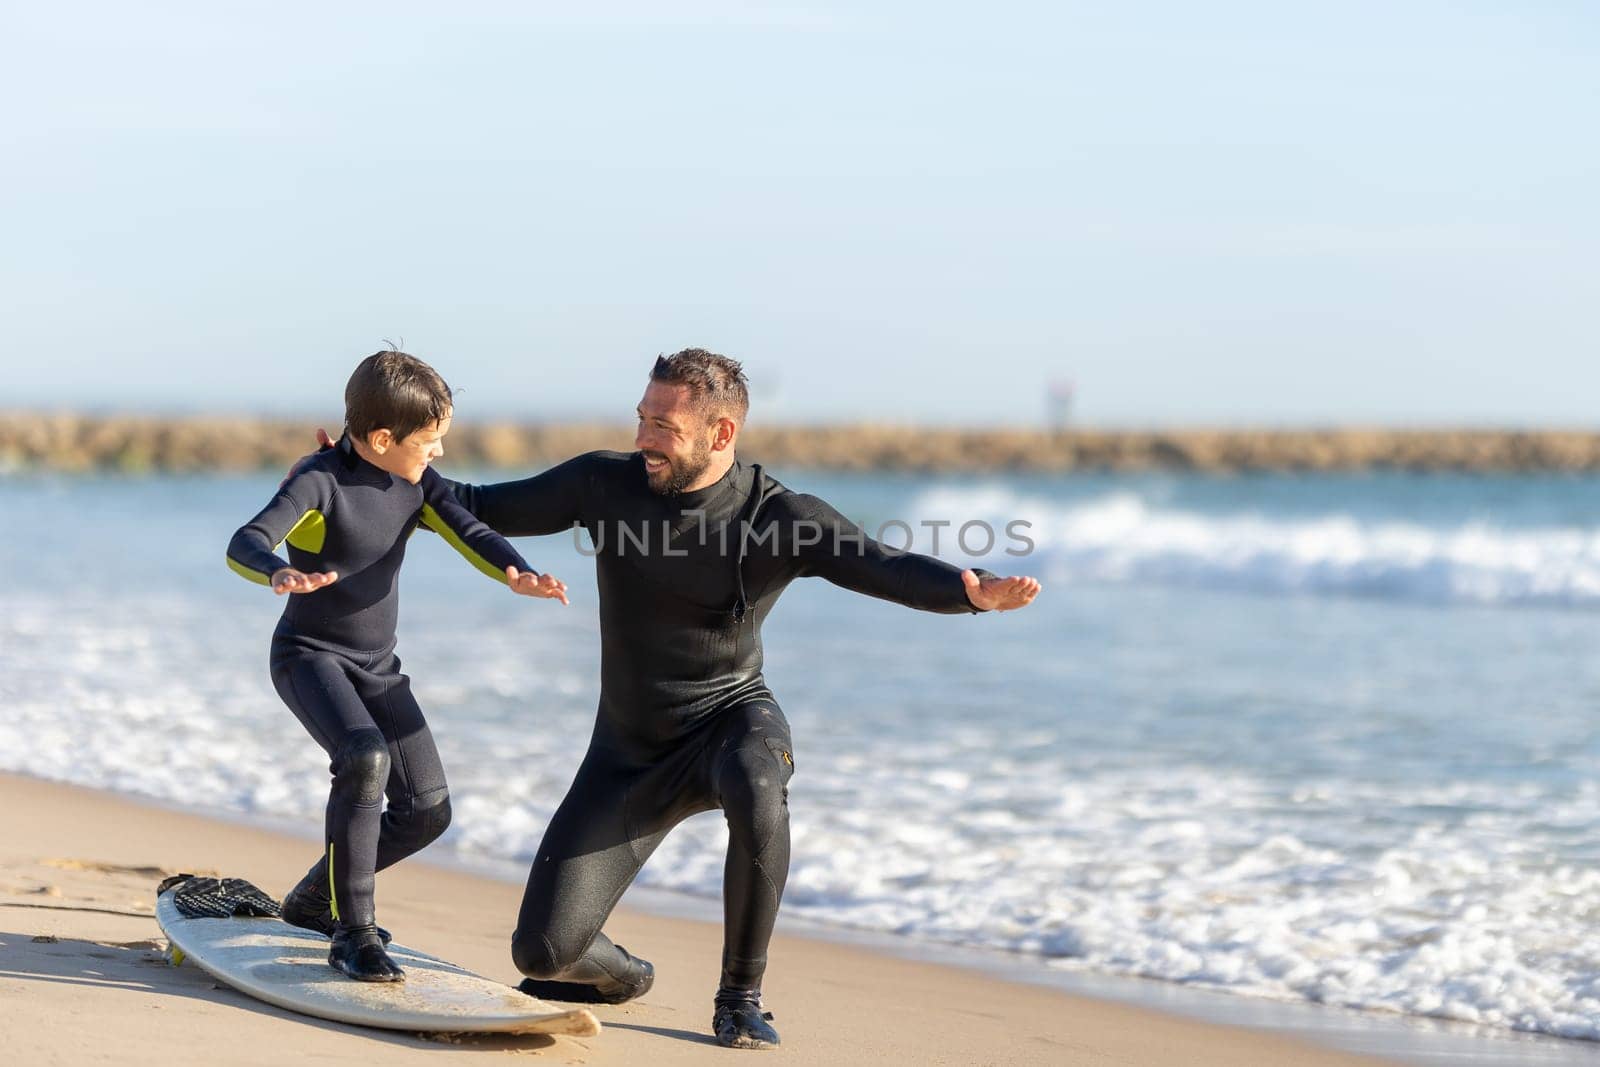 Smiling father teaching his son how to surf. Mid shot